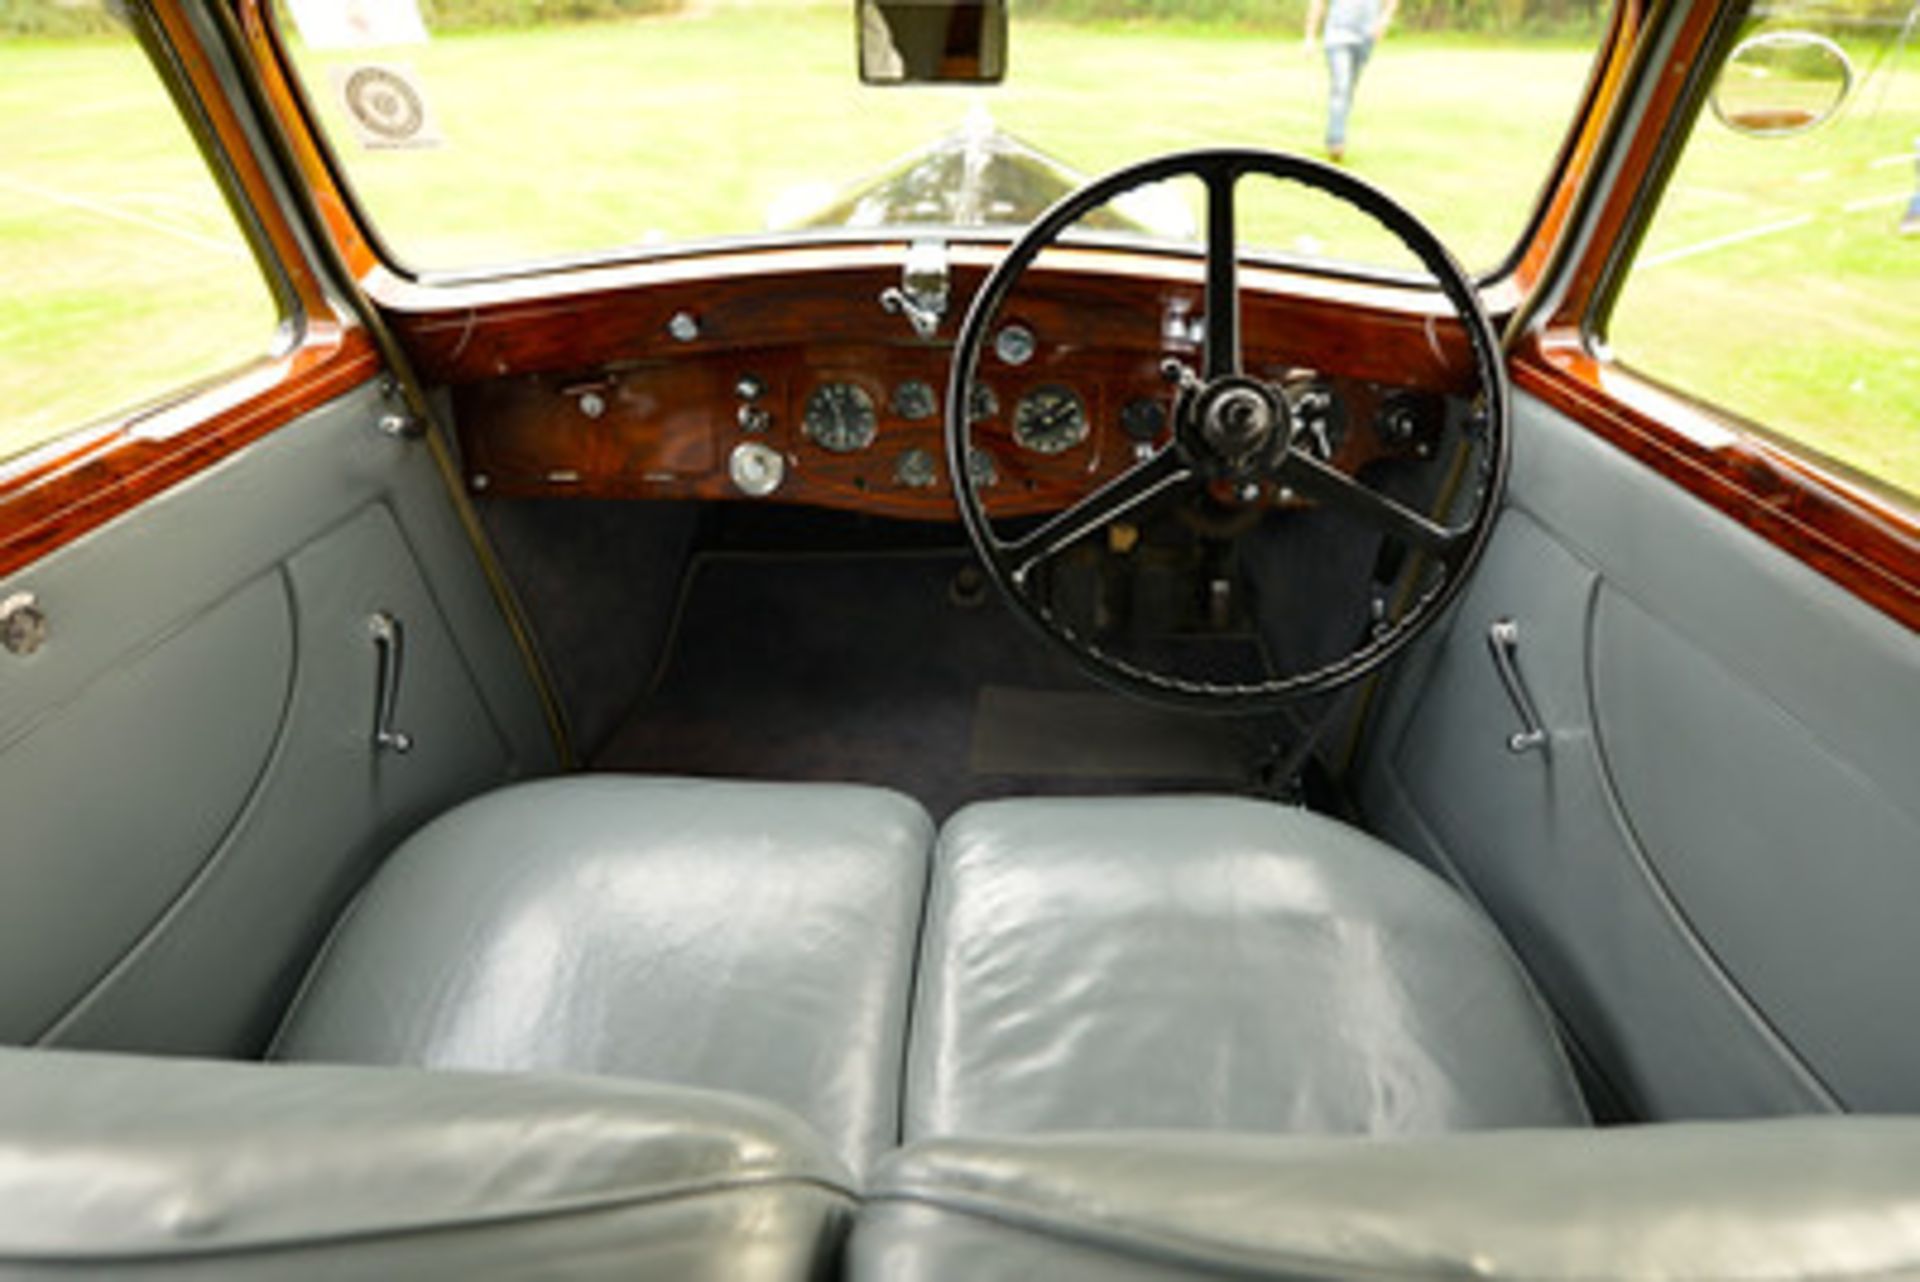 1937 Rolls Royce 25 / 30  James Young Sports Saloon
Chassis Number: GUL73Registration: 618 YUP A - Image 7 of 9